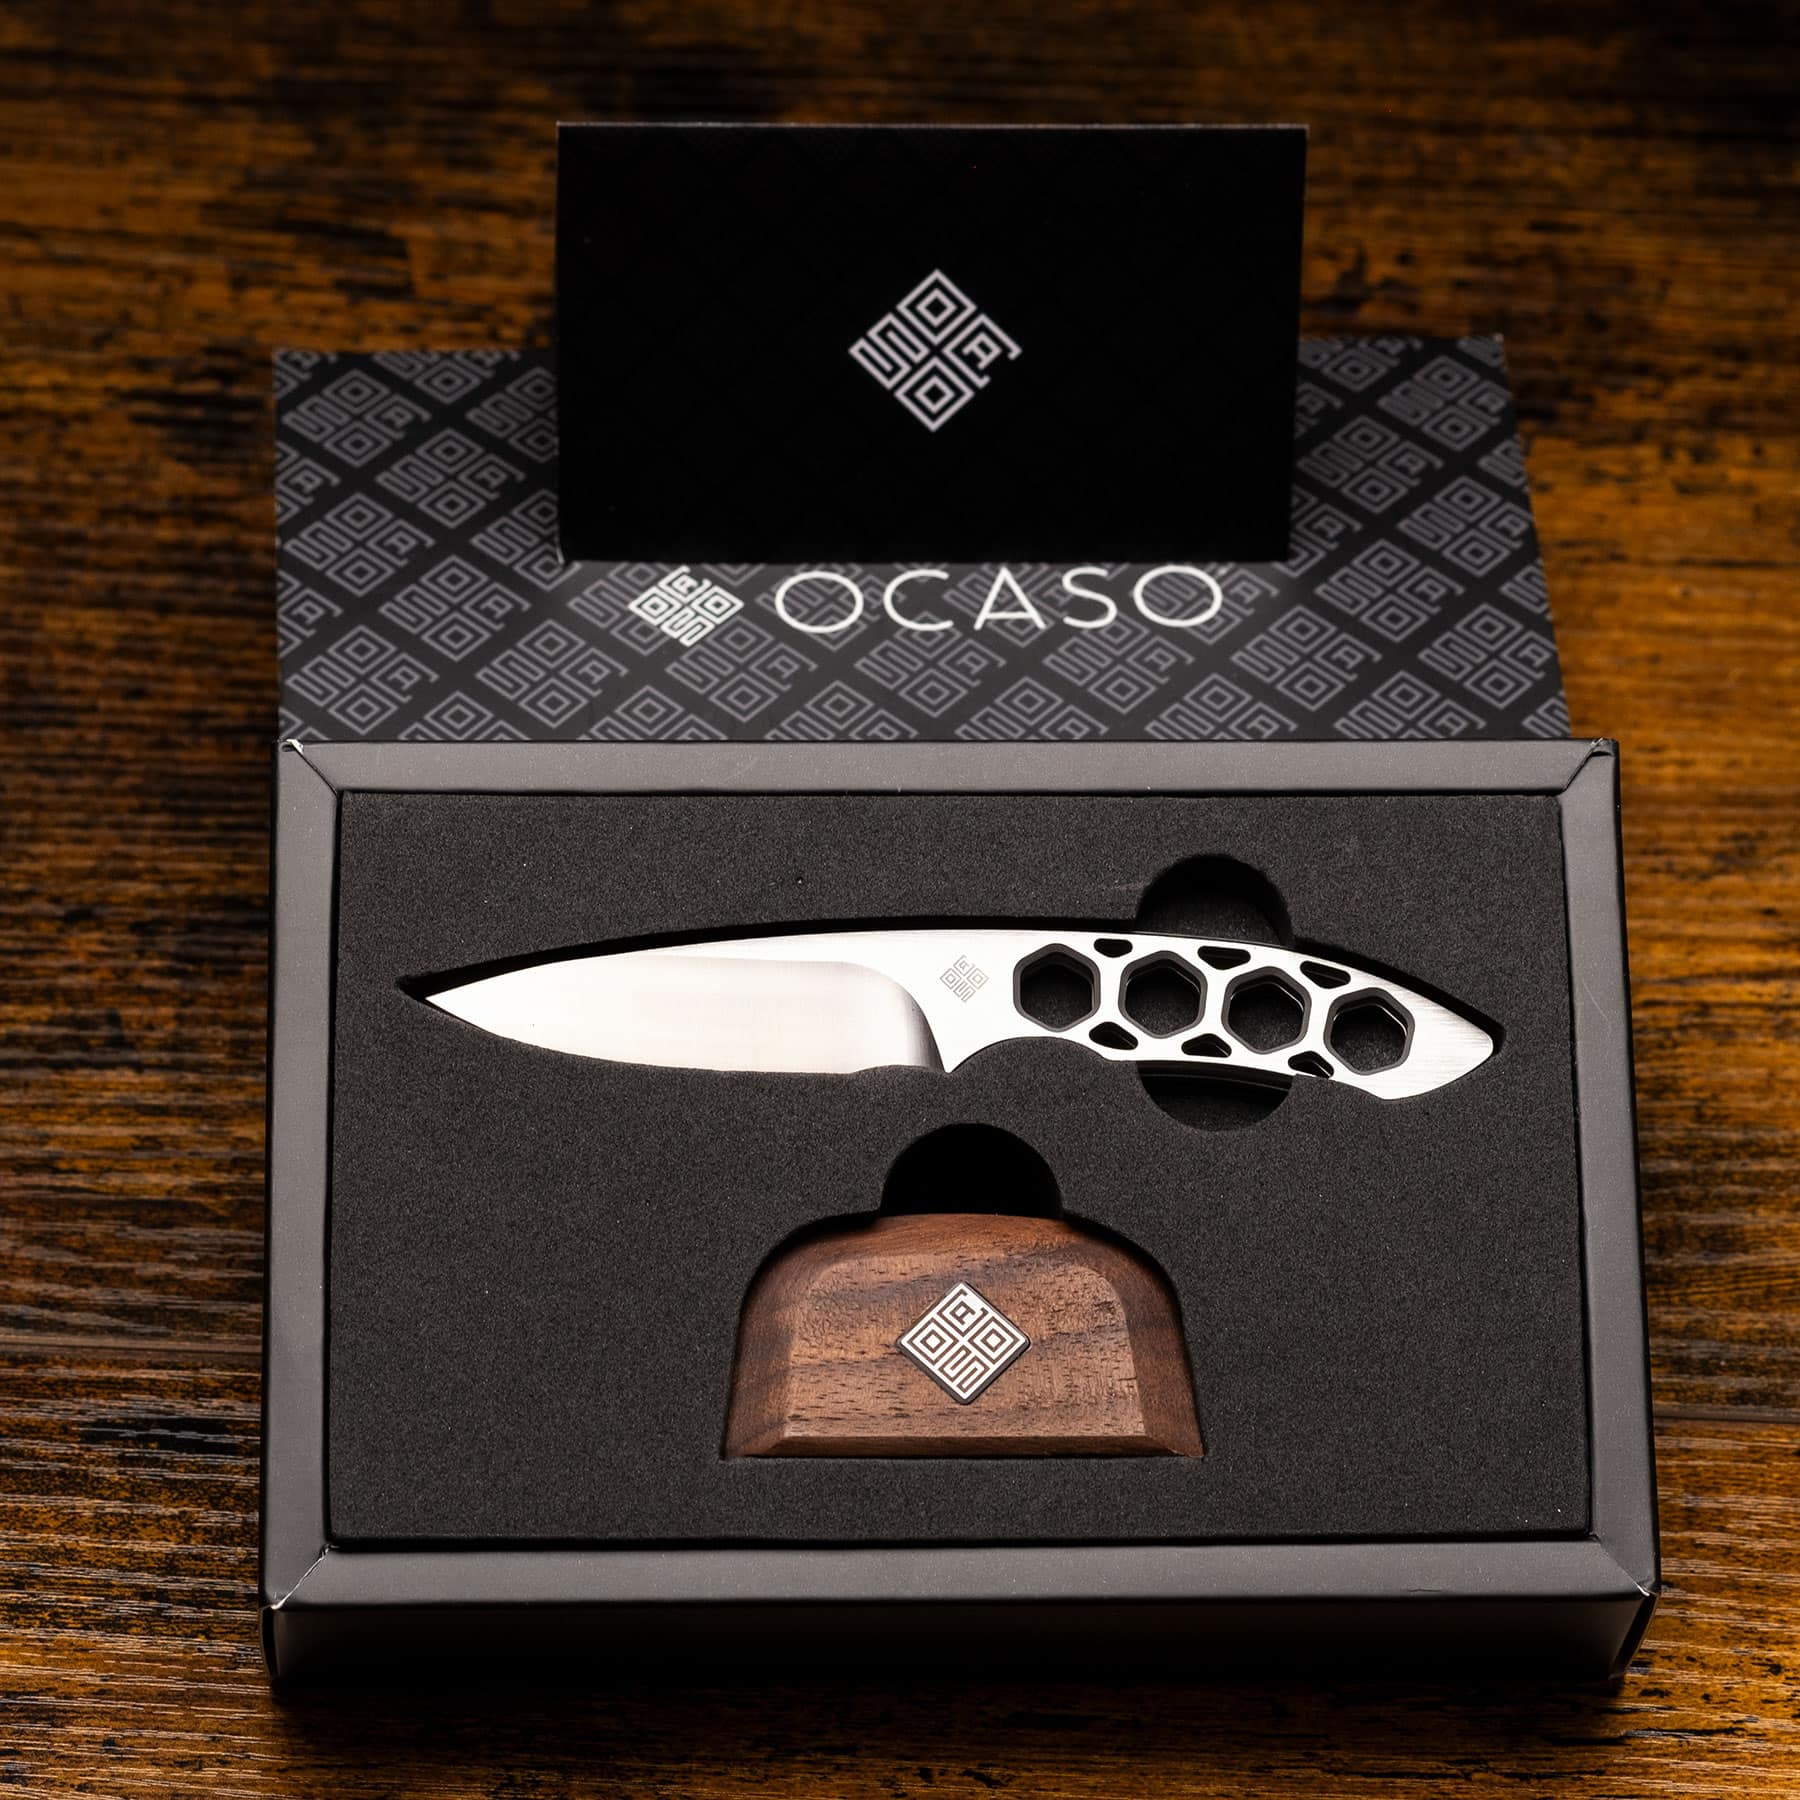 The well thought out Ocaso Duo packaging makes it a great option for a gift. 